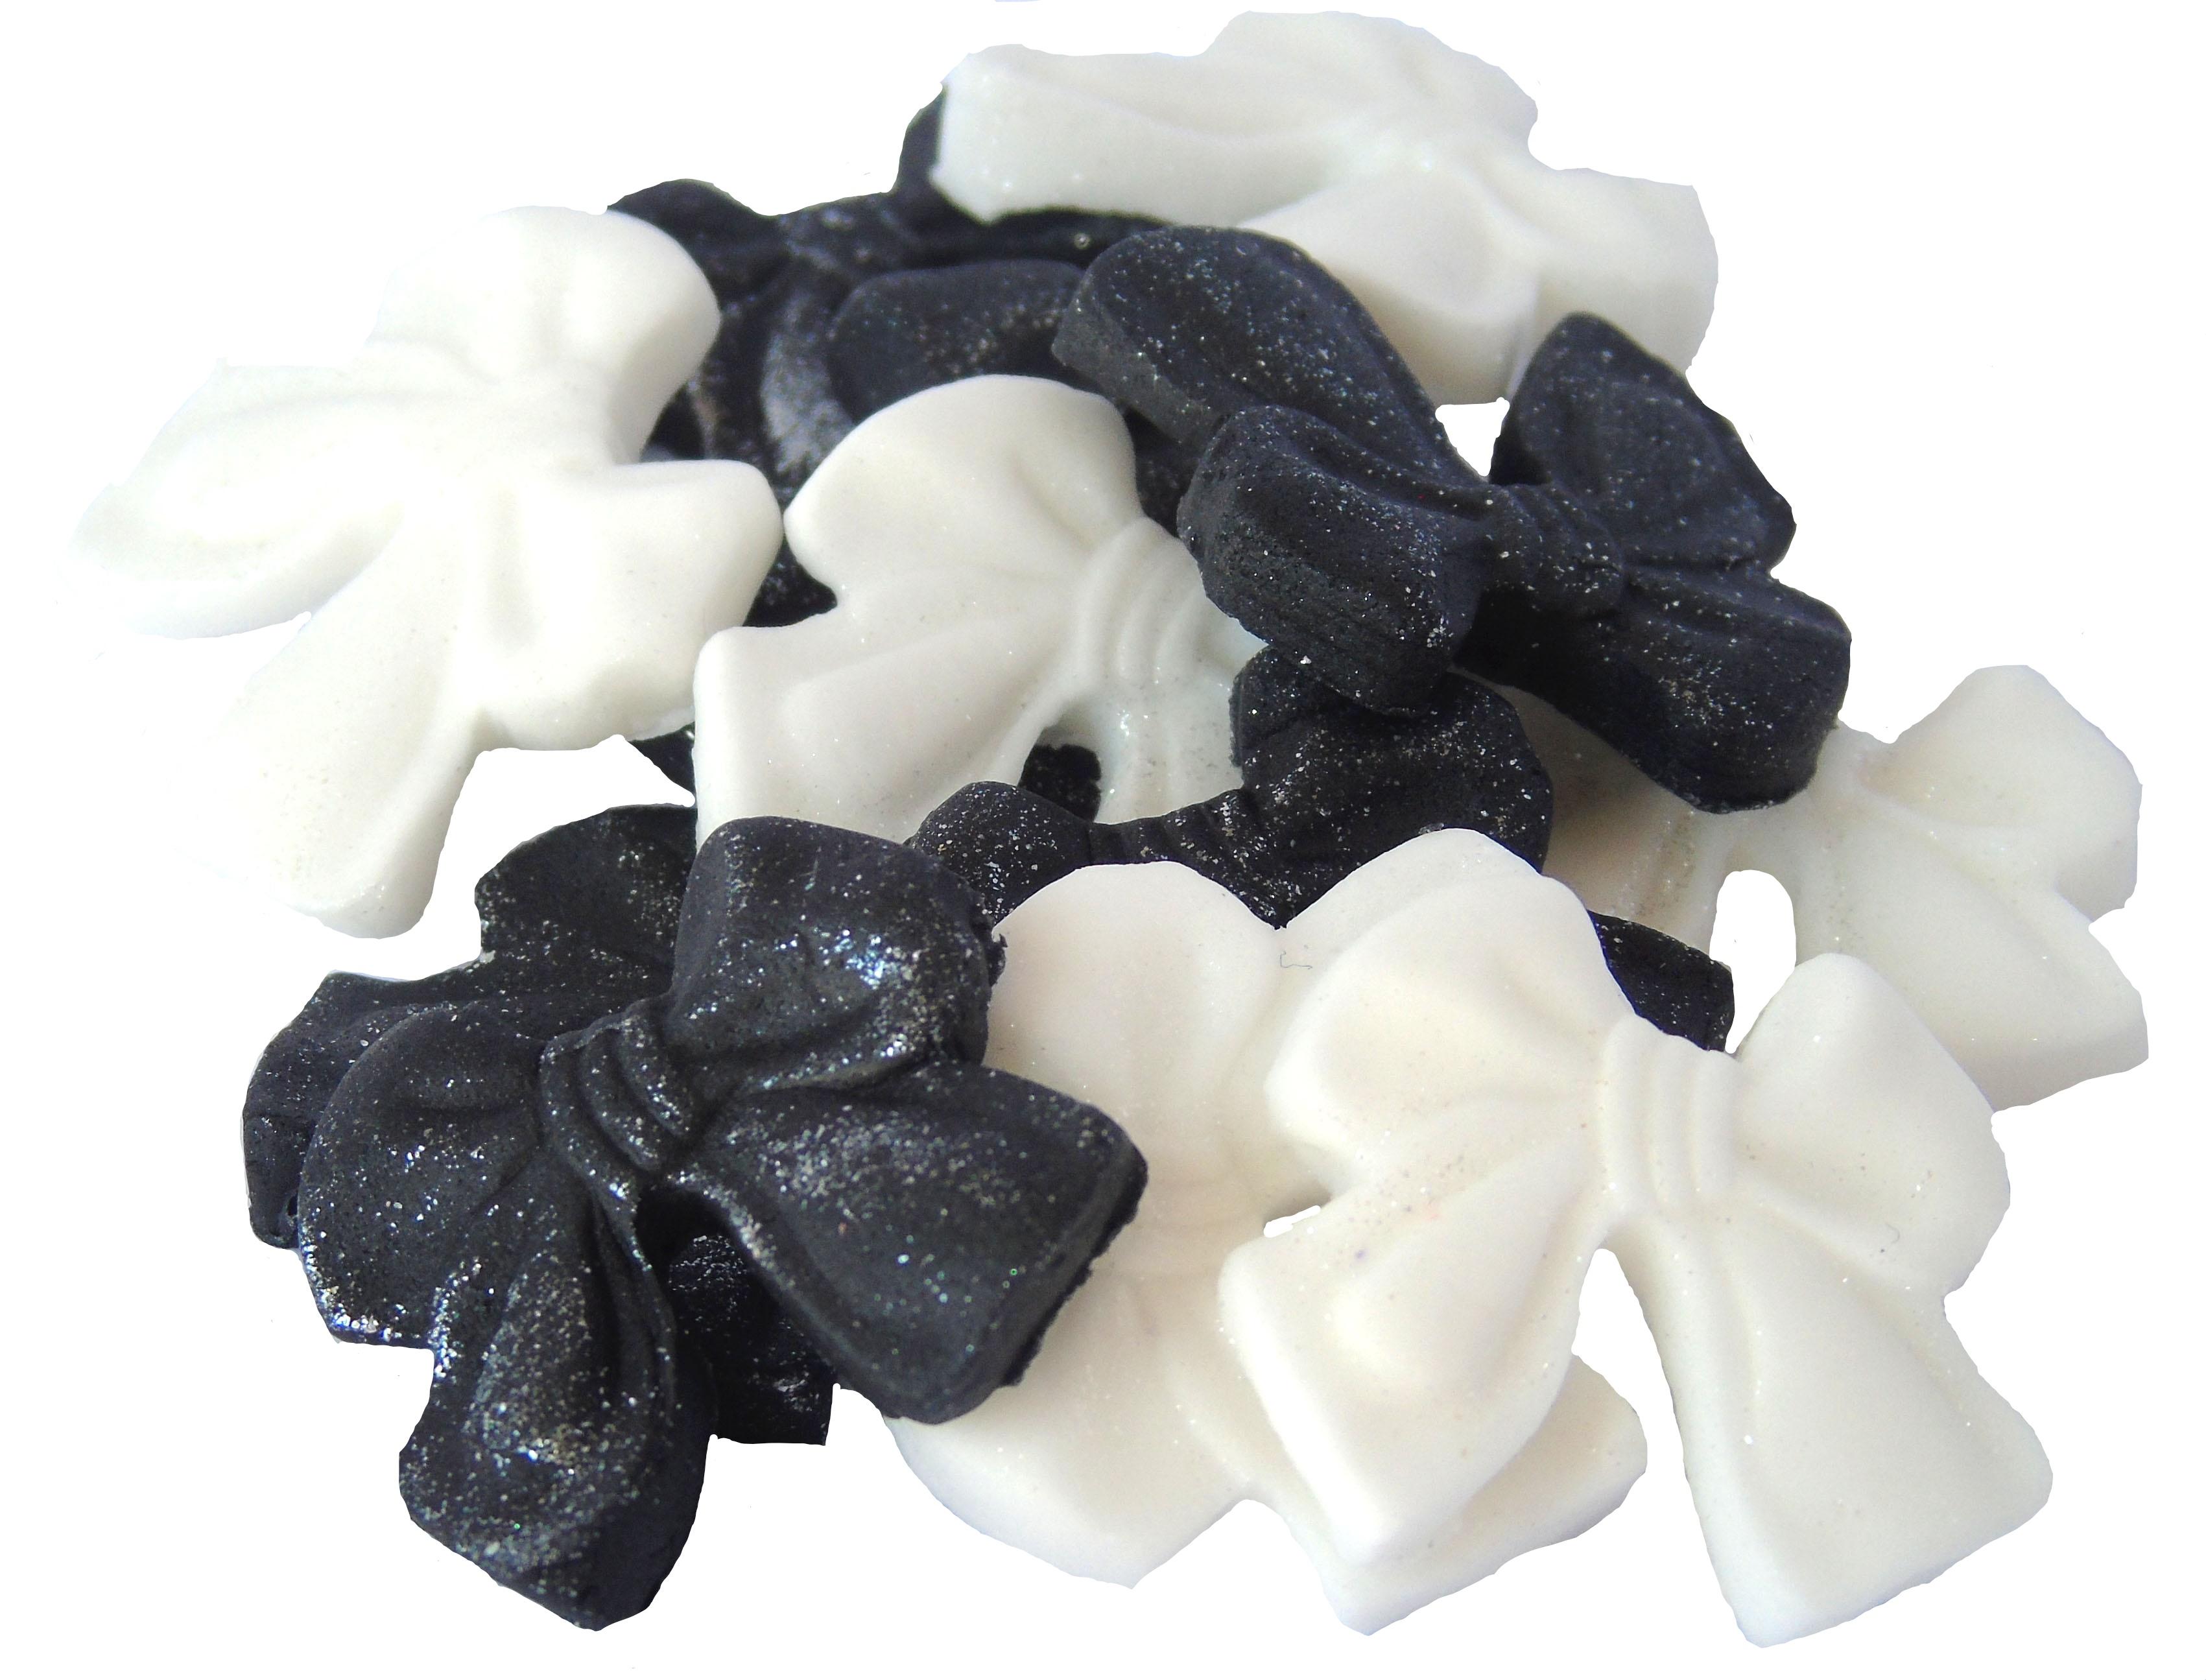 12 Edible Black & White Mixed Glittered Bows Vegan, Dairy & Gluten Free cupcake toppers